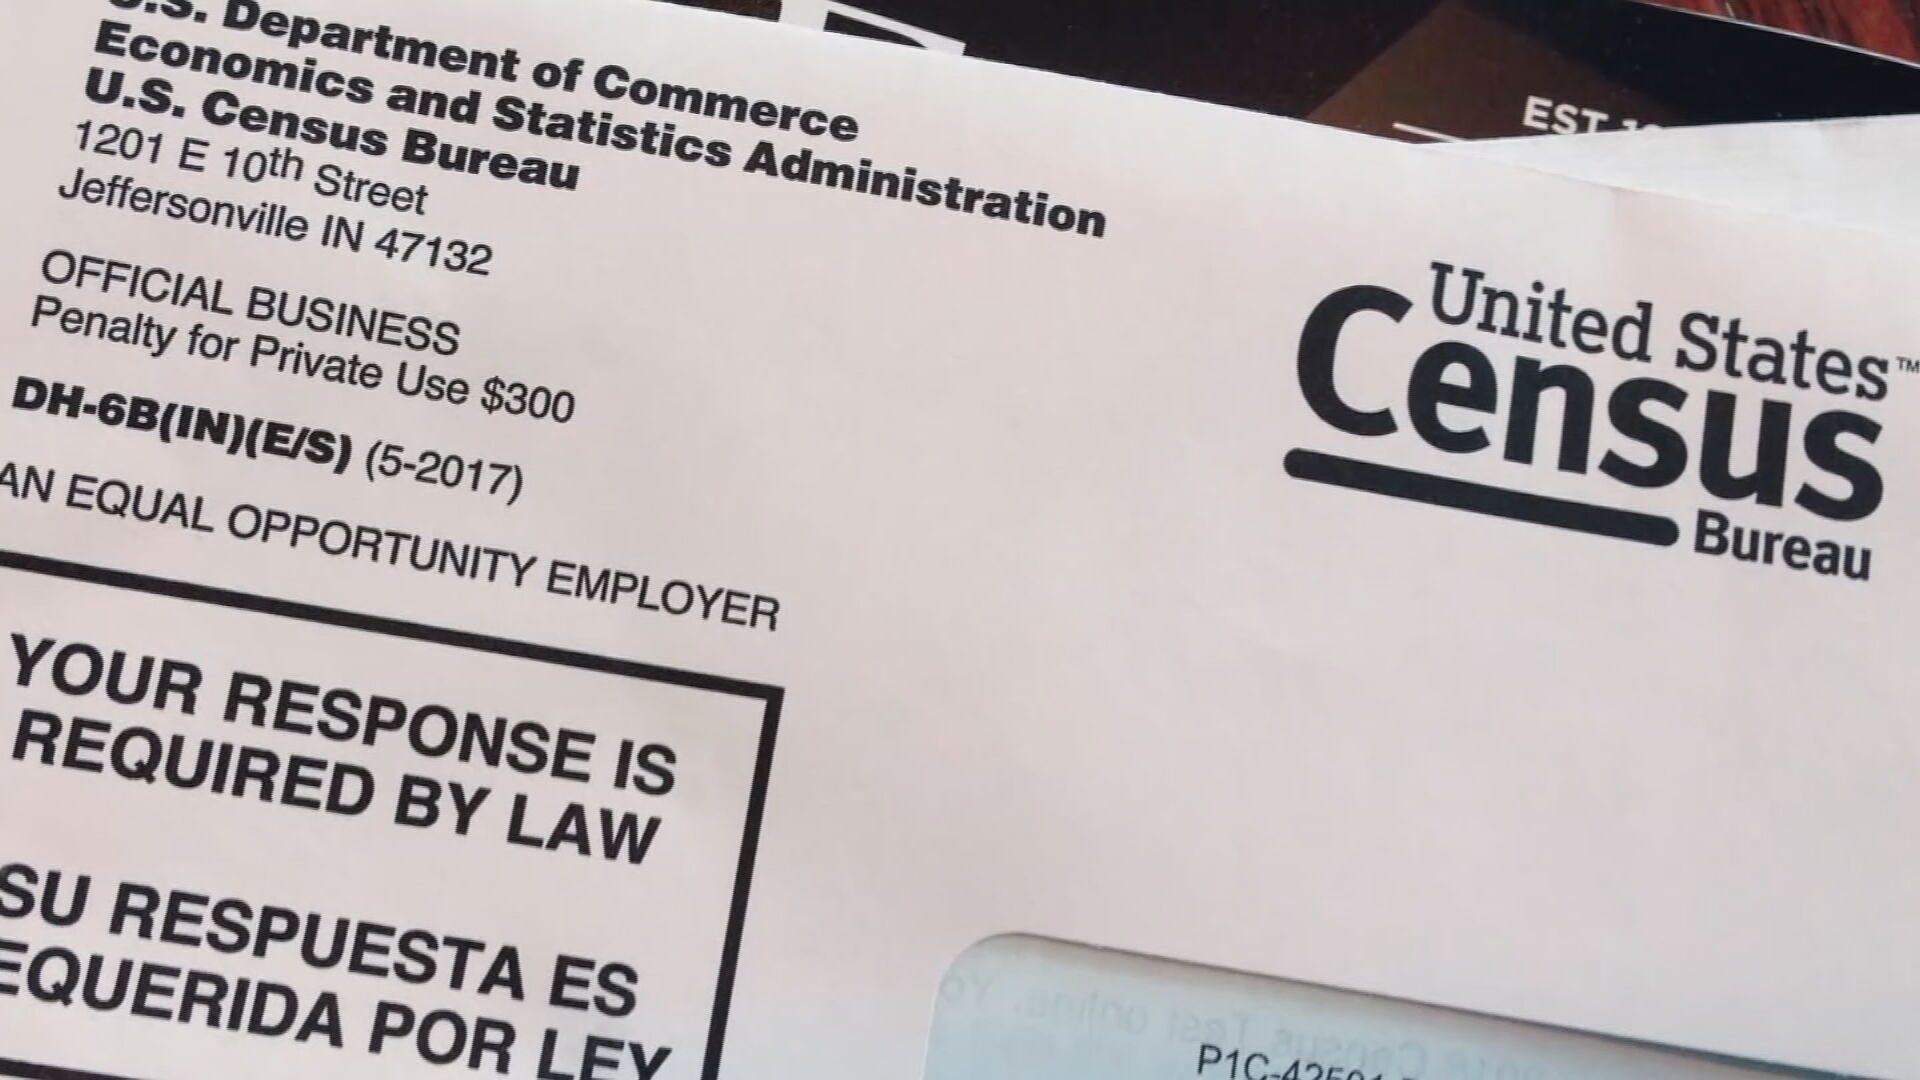 Cities, Counties Gear Up For 2020 Census Without Federal Funding